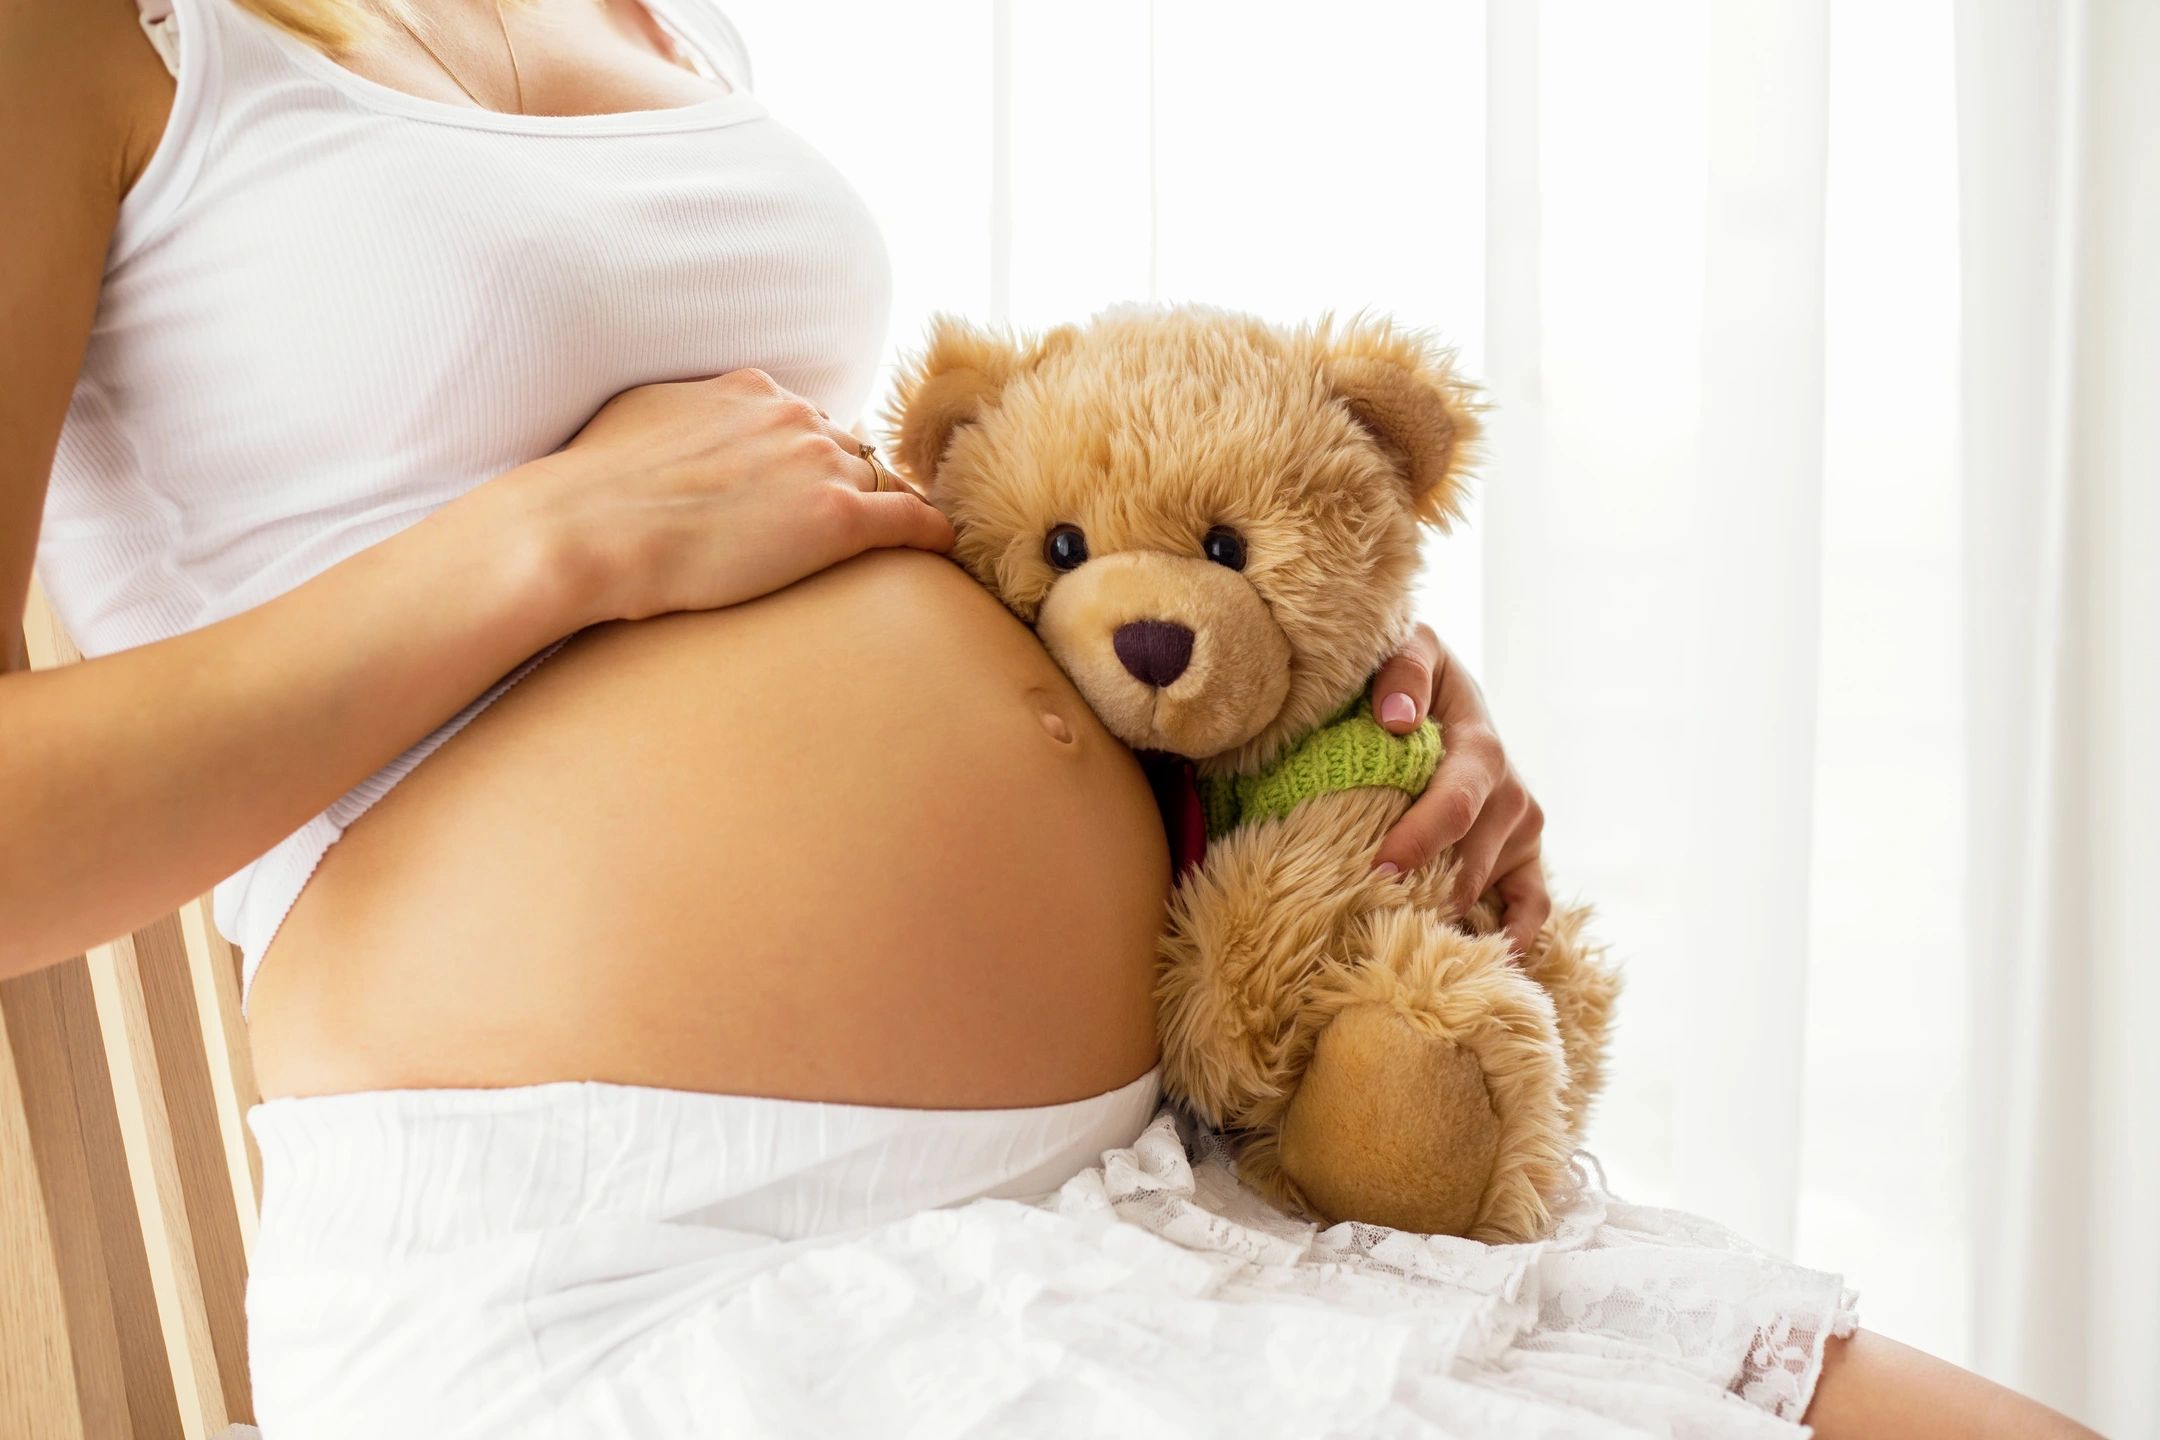 infertility acupuncture treatment in San Clemente, CA 